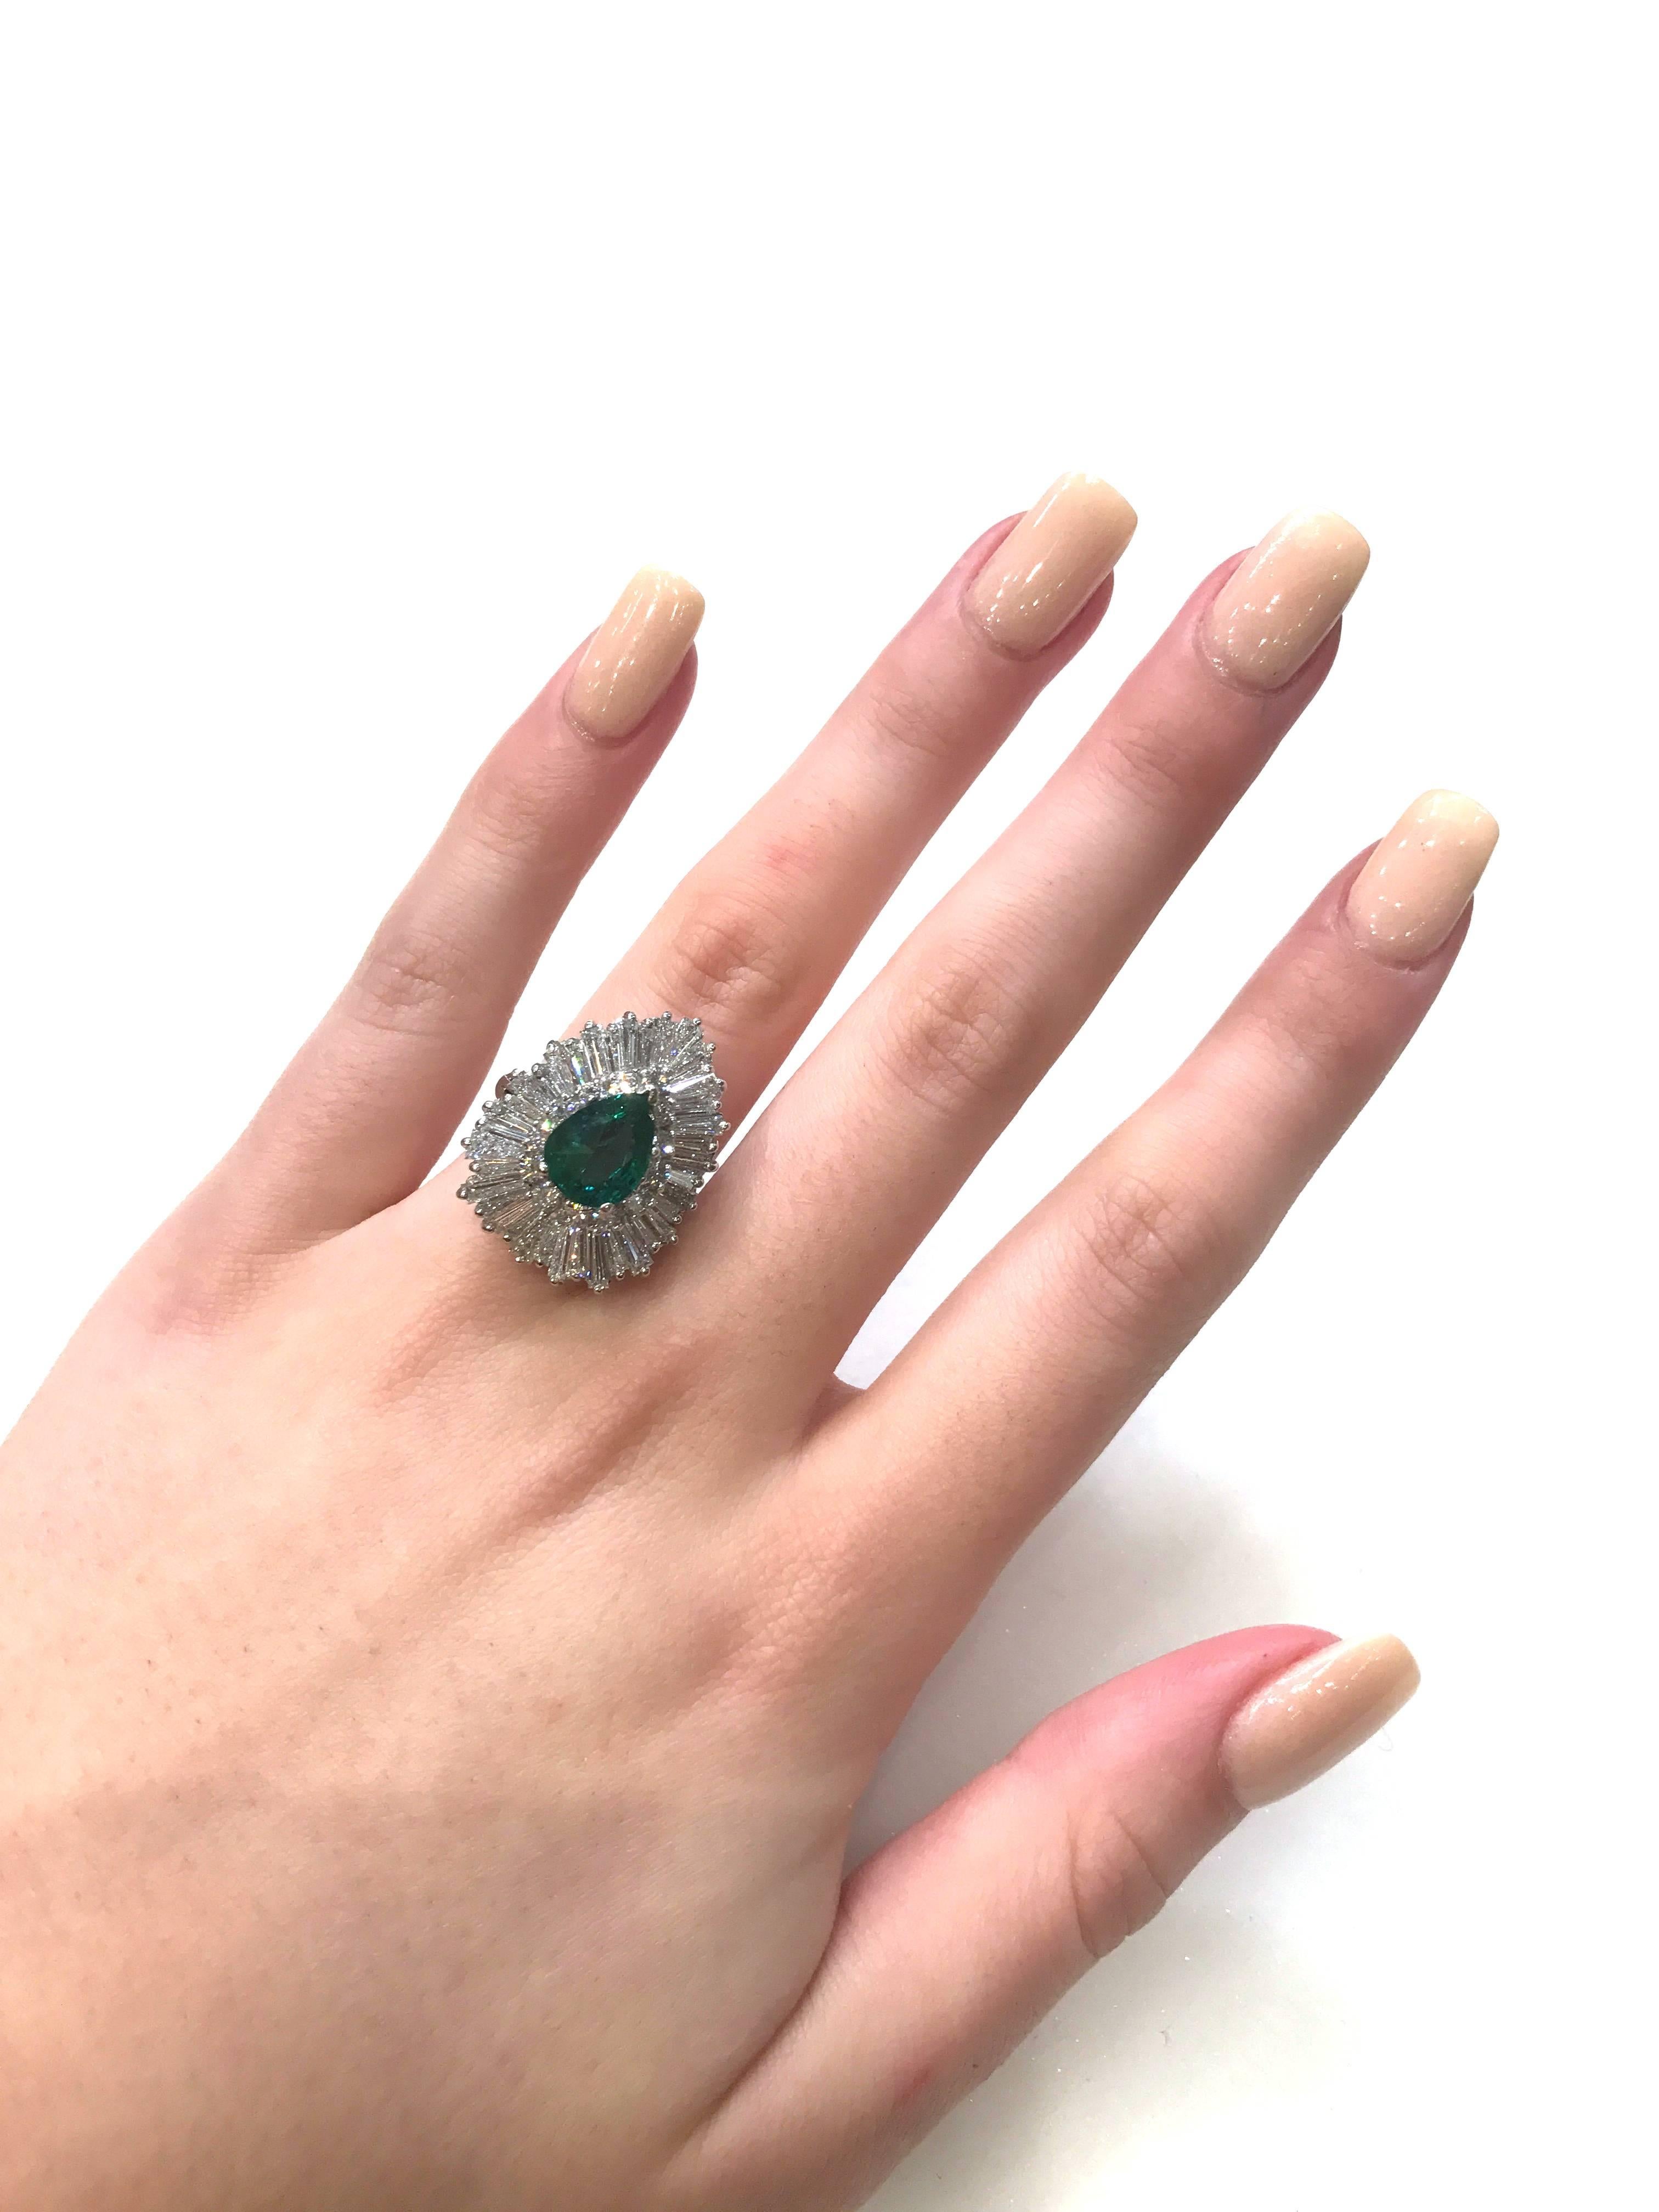 Baguette Cut 2.15 Carat Pear Shaped Colombian Emerald and 3.95 Carat Diamond Cocktail Ring For Sale